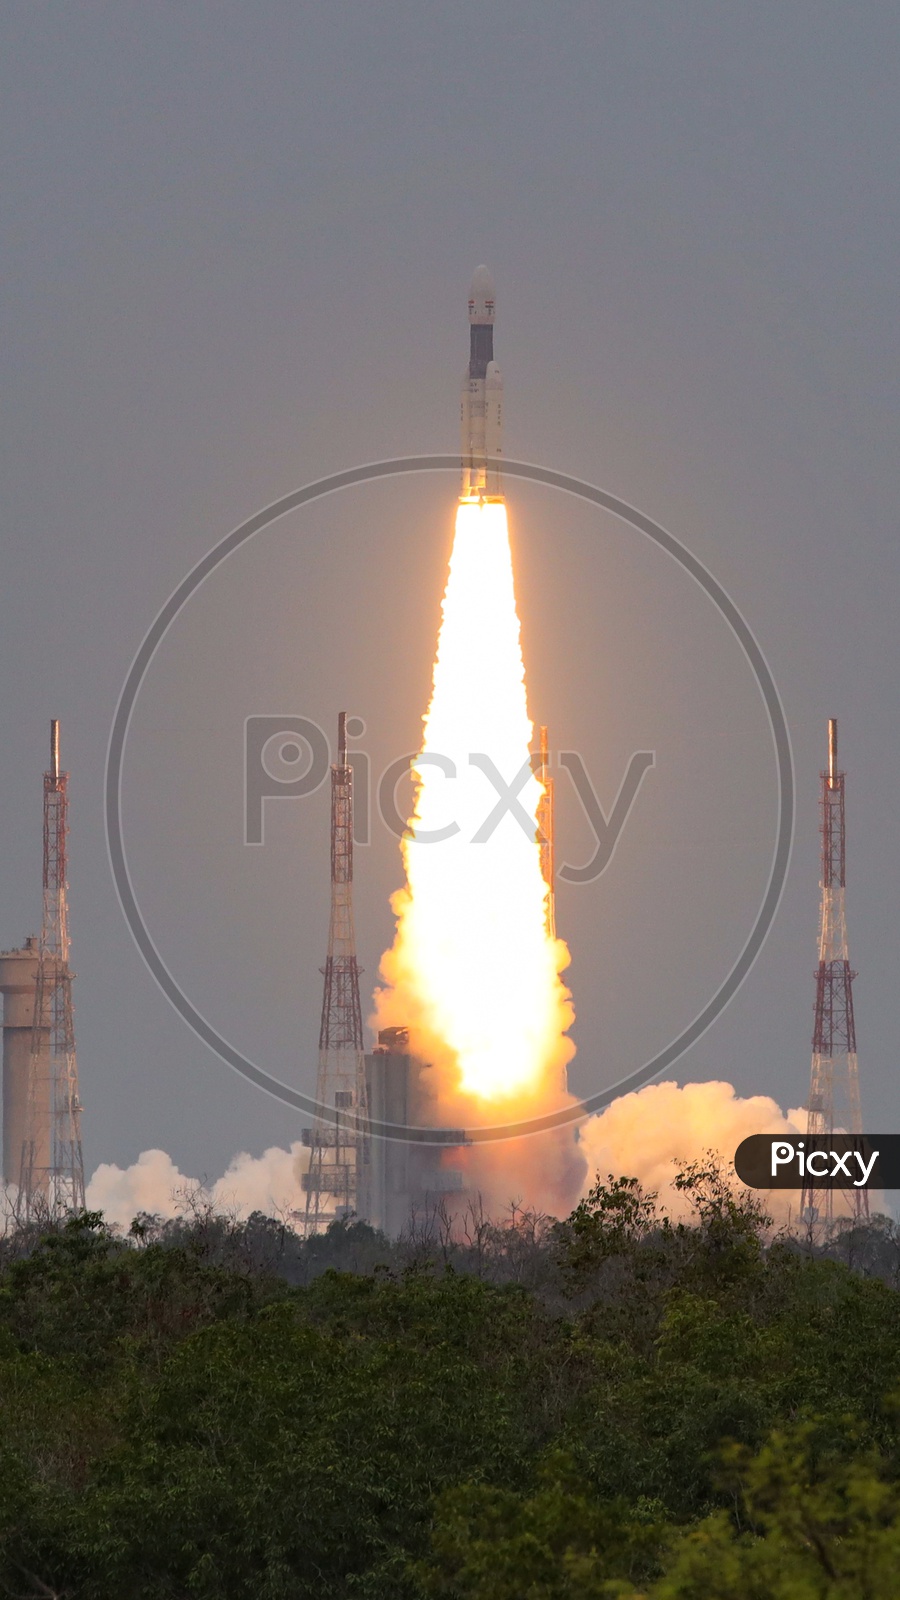 GSLV- Mk III - M1 or Chandrayaan -2 Launch Vehicle Taking Off From Launch Pad In Sriharikota